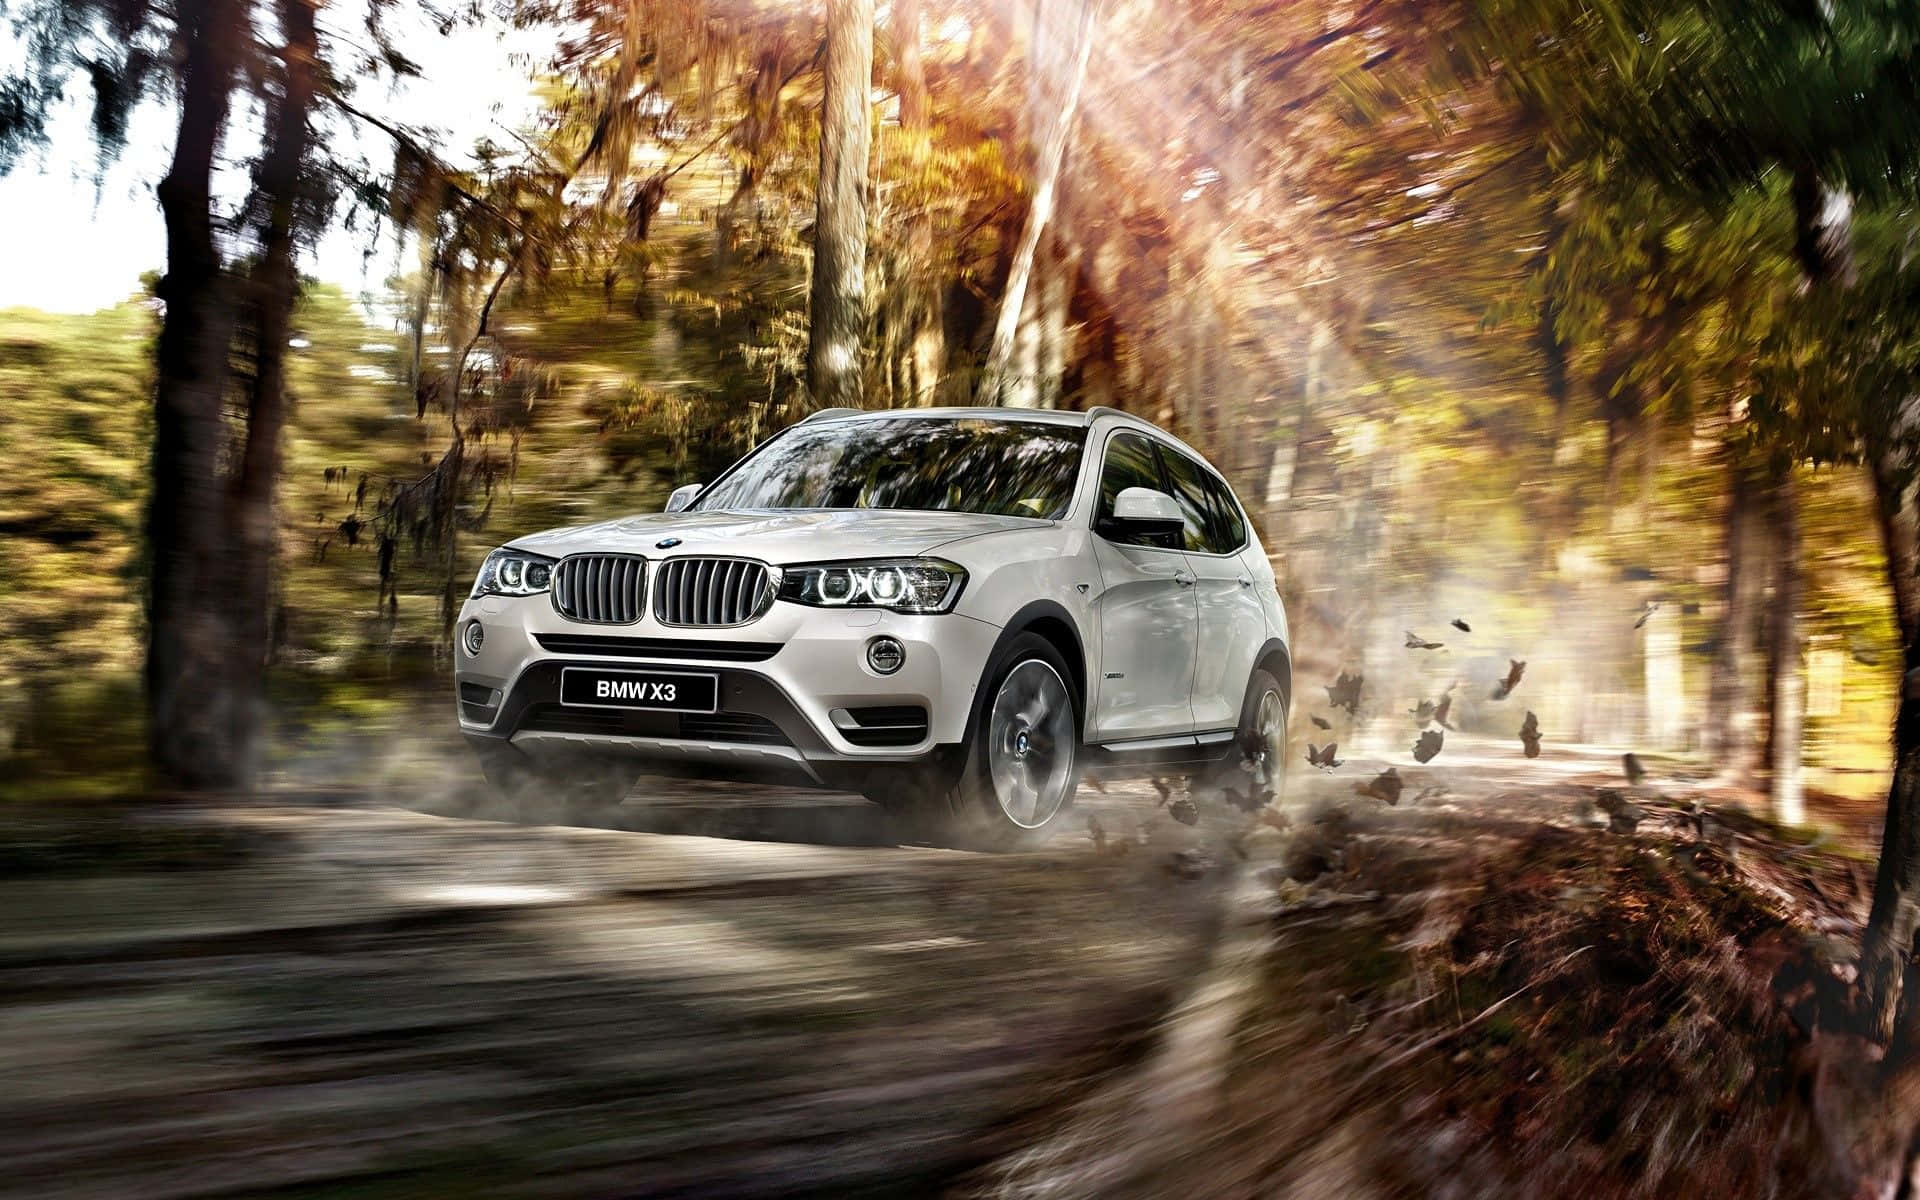 Luxury and Power Combined - BMW X3 Wallpaper